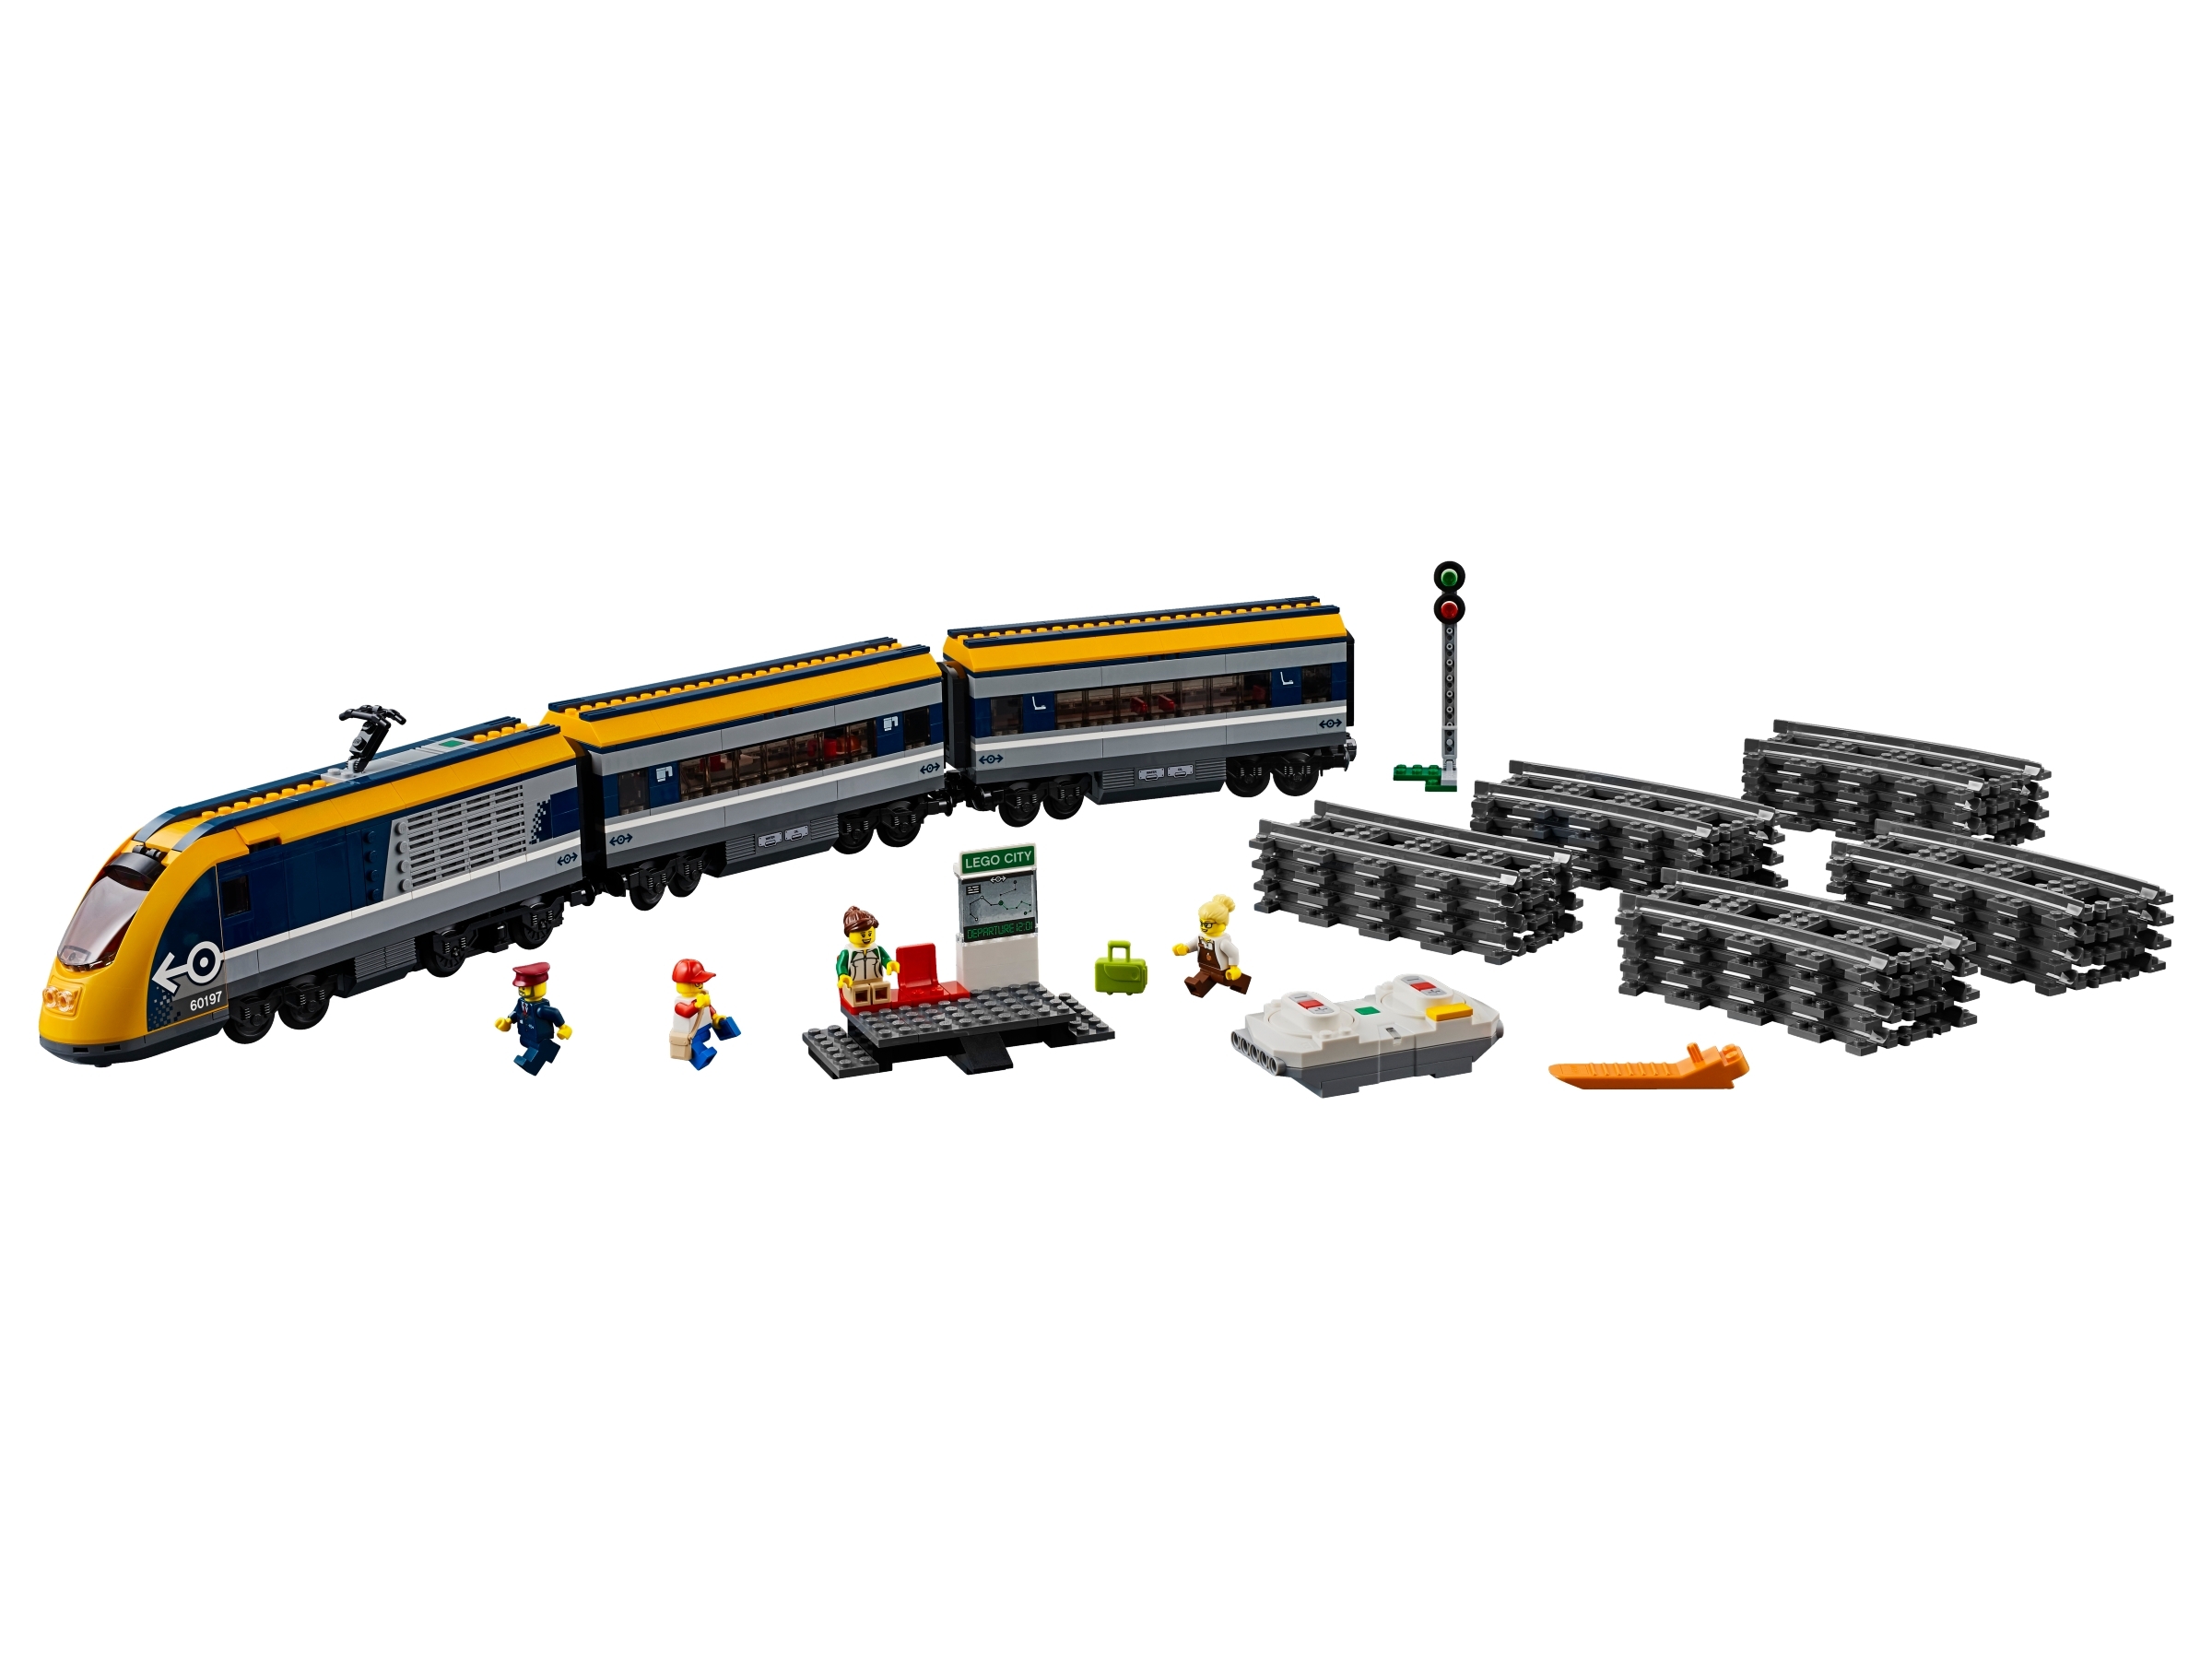 Verspilling Lief Huis Passenger Train 60197 | City | Buy online at the Official LEGO® Shop US